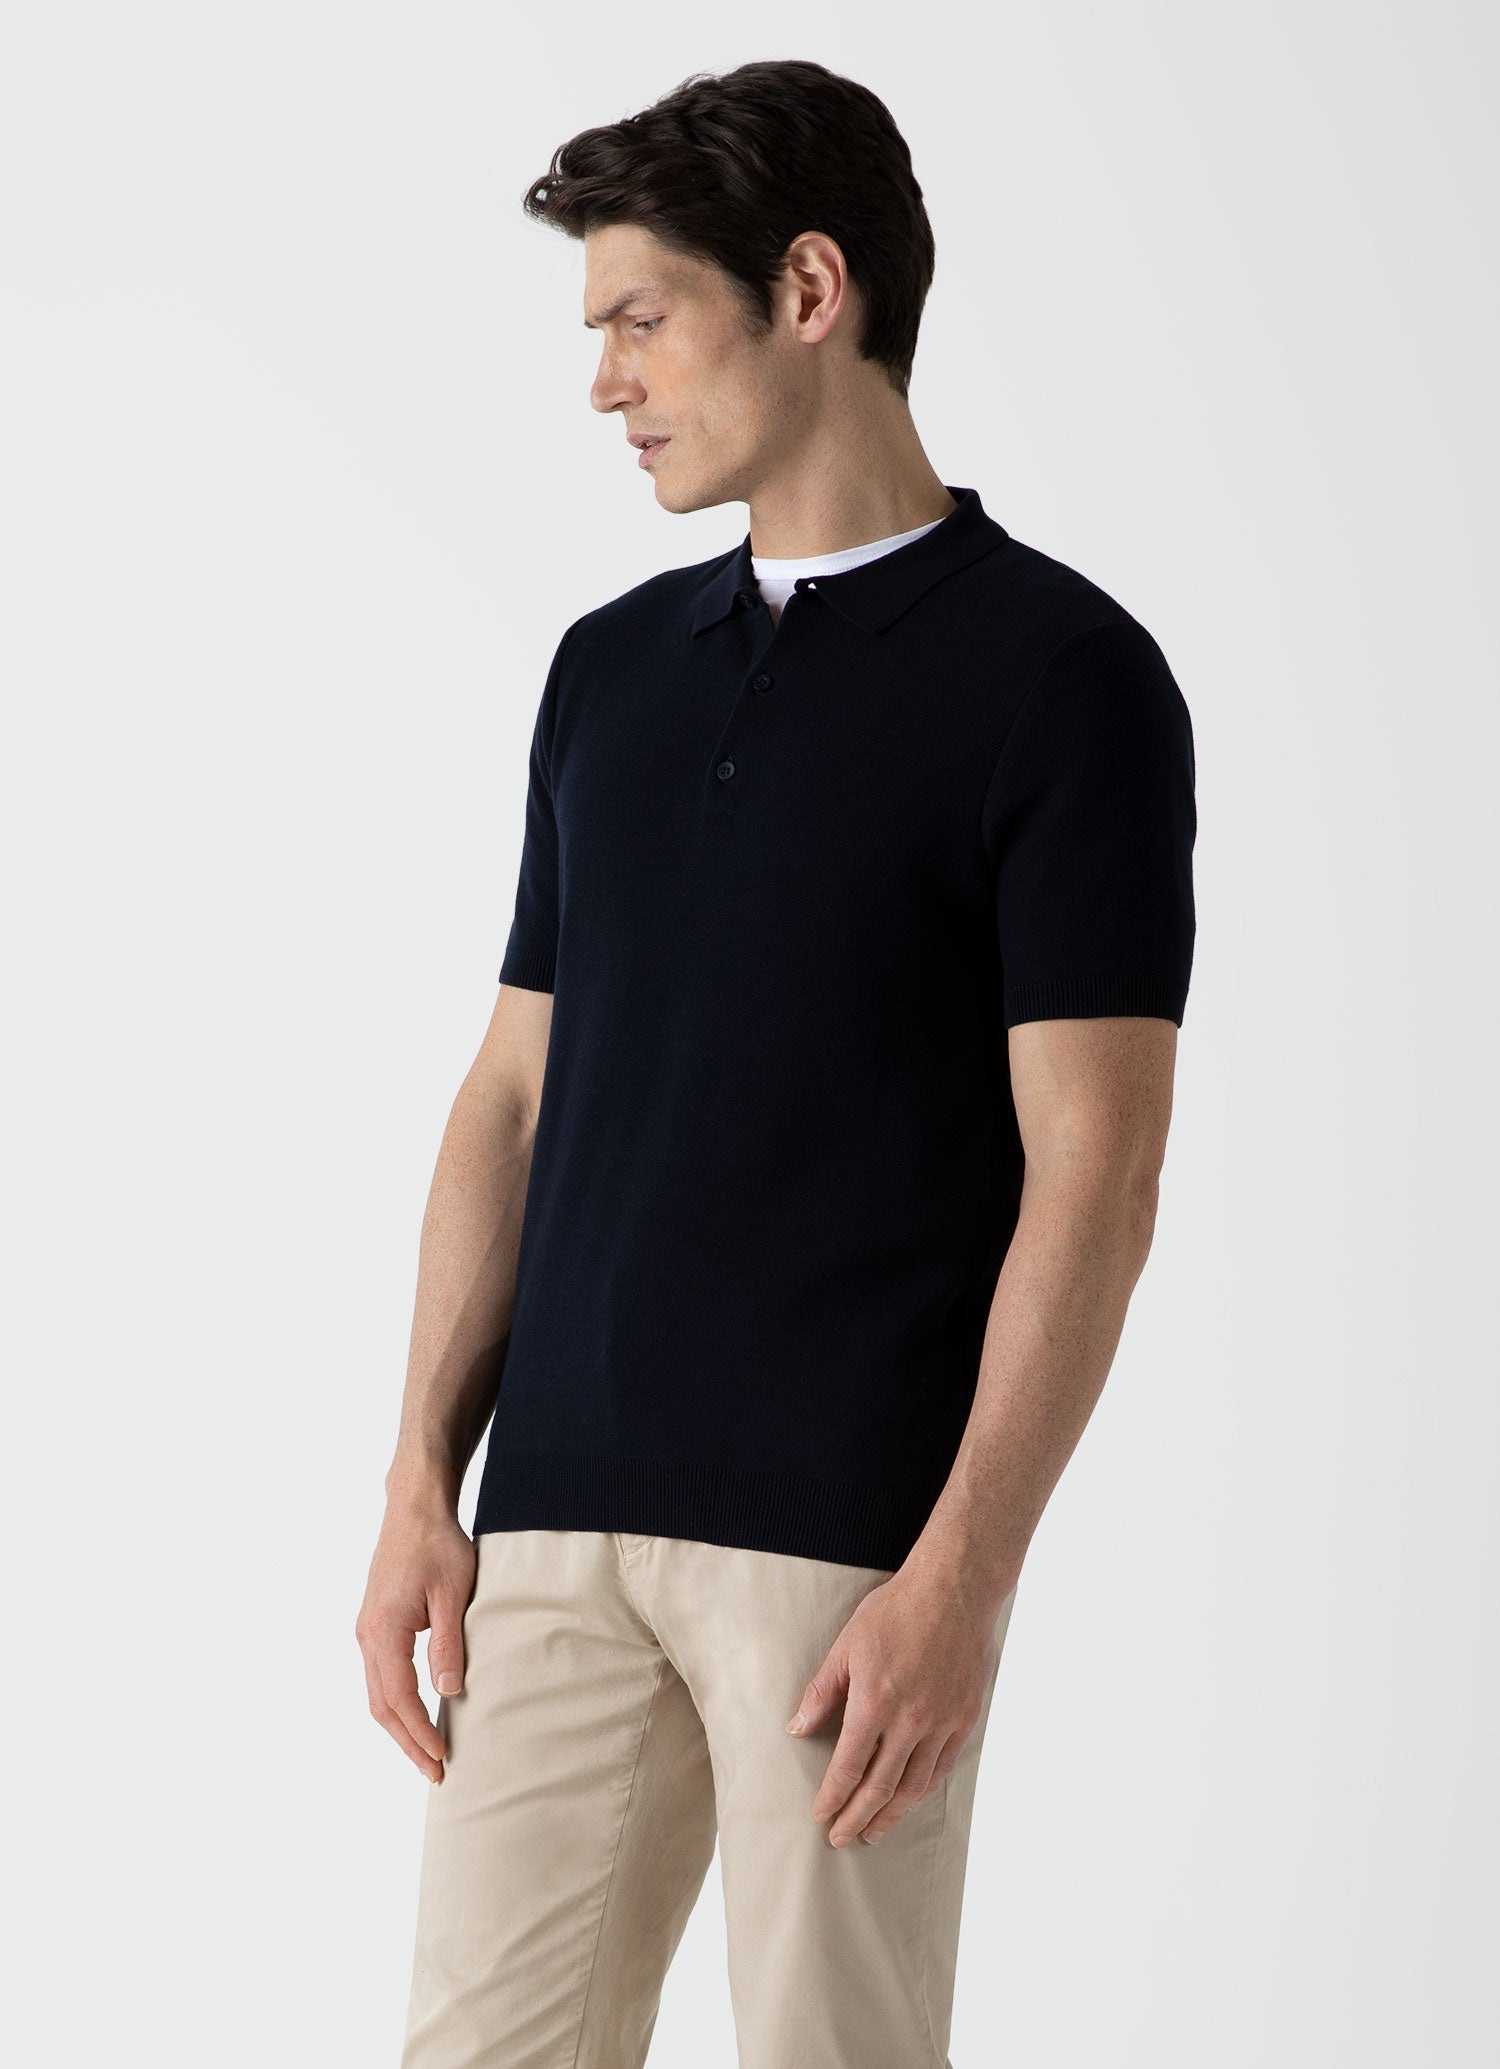 Men's Knit Polo Shirt in Navy